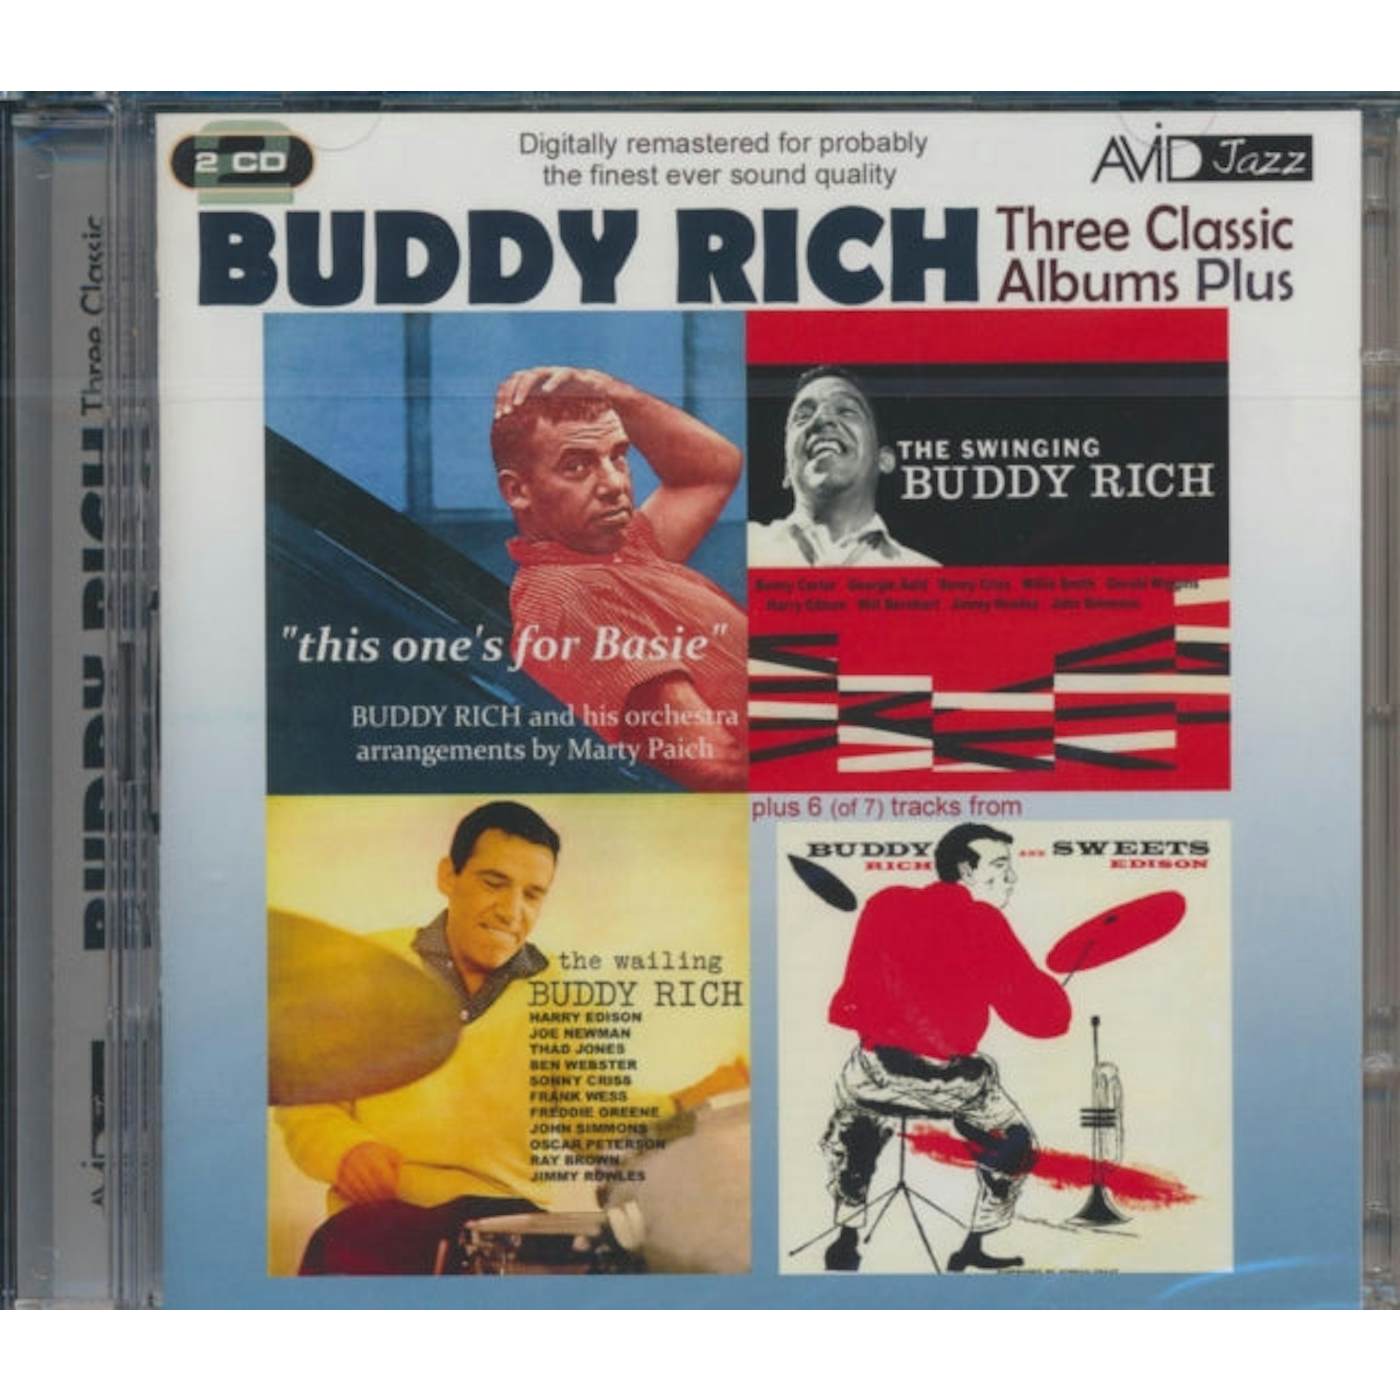 Buddy Rich CD - Three Classic Albums Plus (The Wailing Buddy Rich / The Swinging Buddy Rich / This One's For Basie)